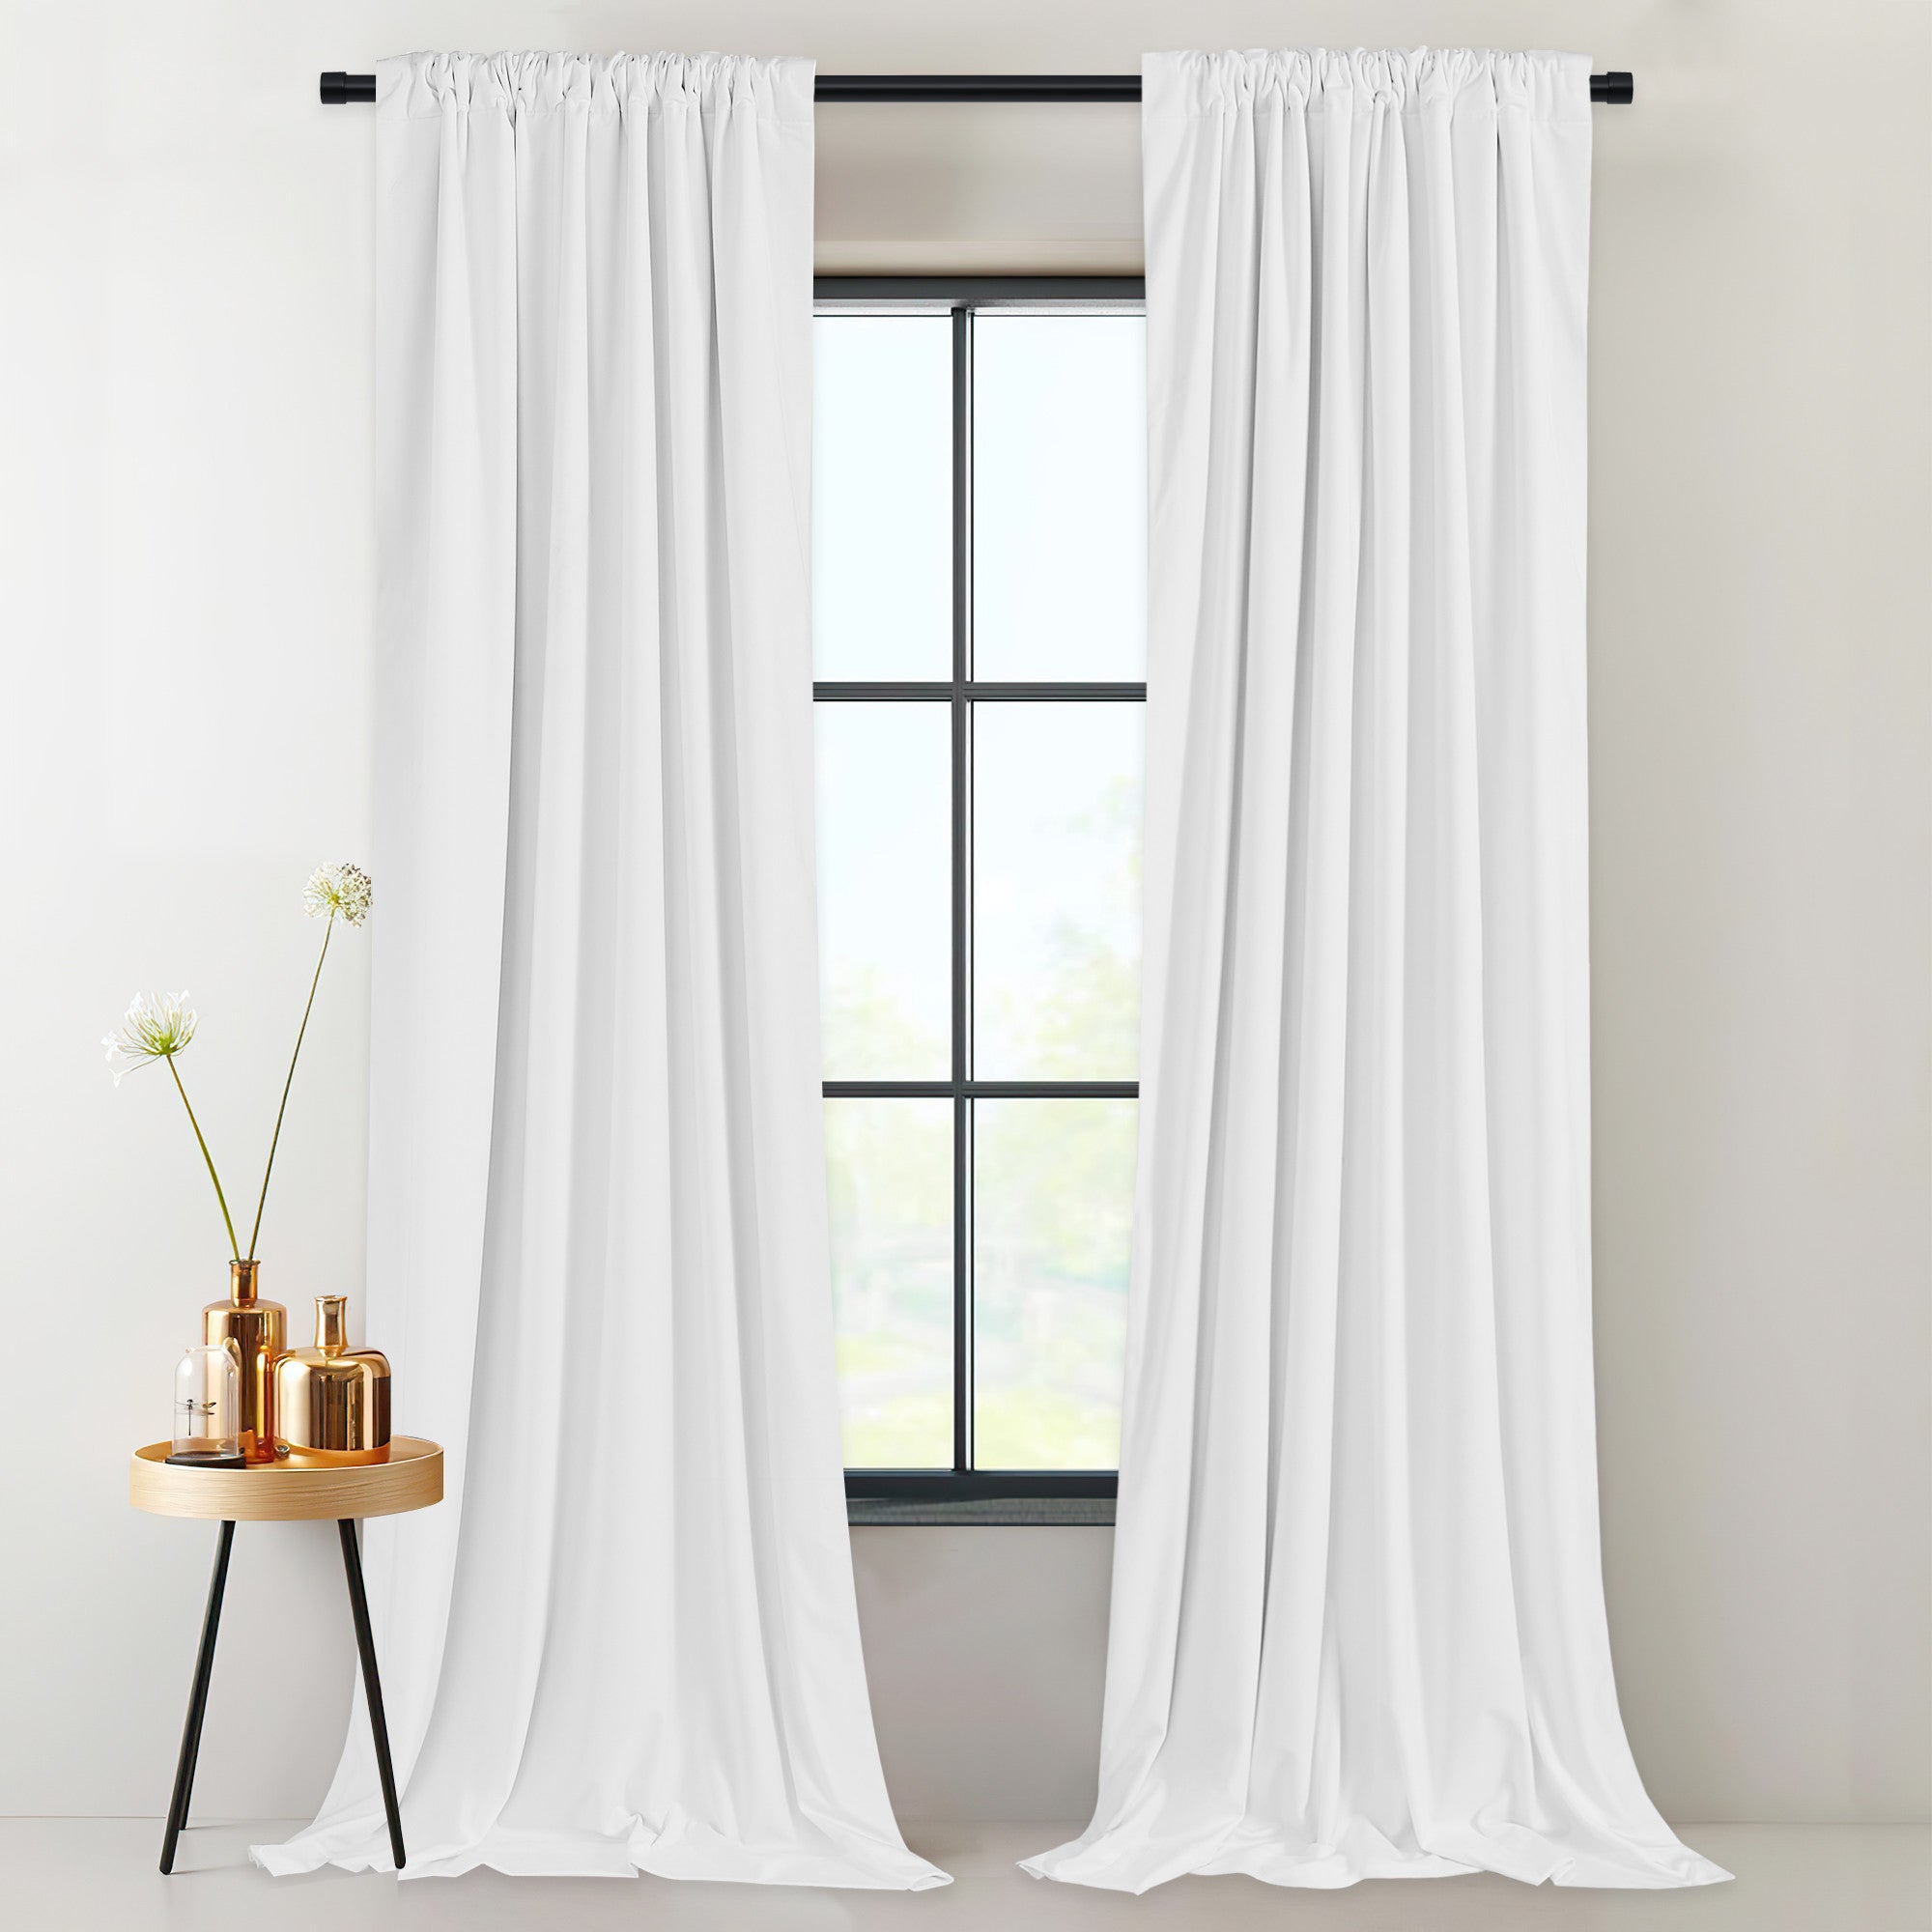 2 Layers Rod Pocket & Back Tab Velvet Thermal Insulated Light Blocking Thick Drapes Curtains, 1 Panels